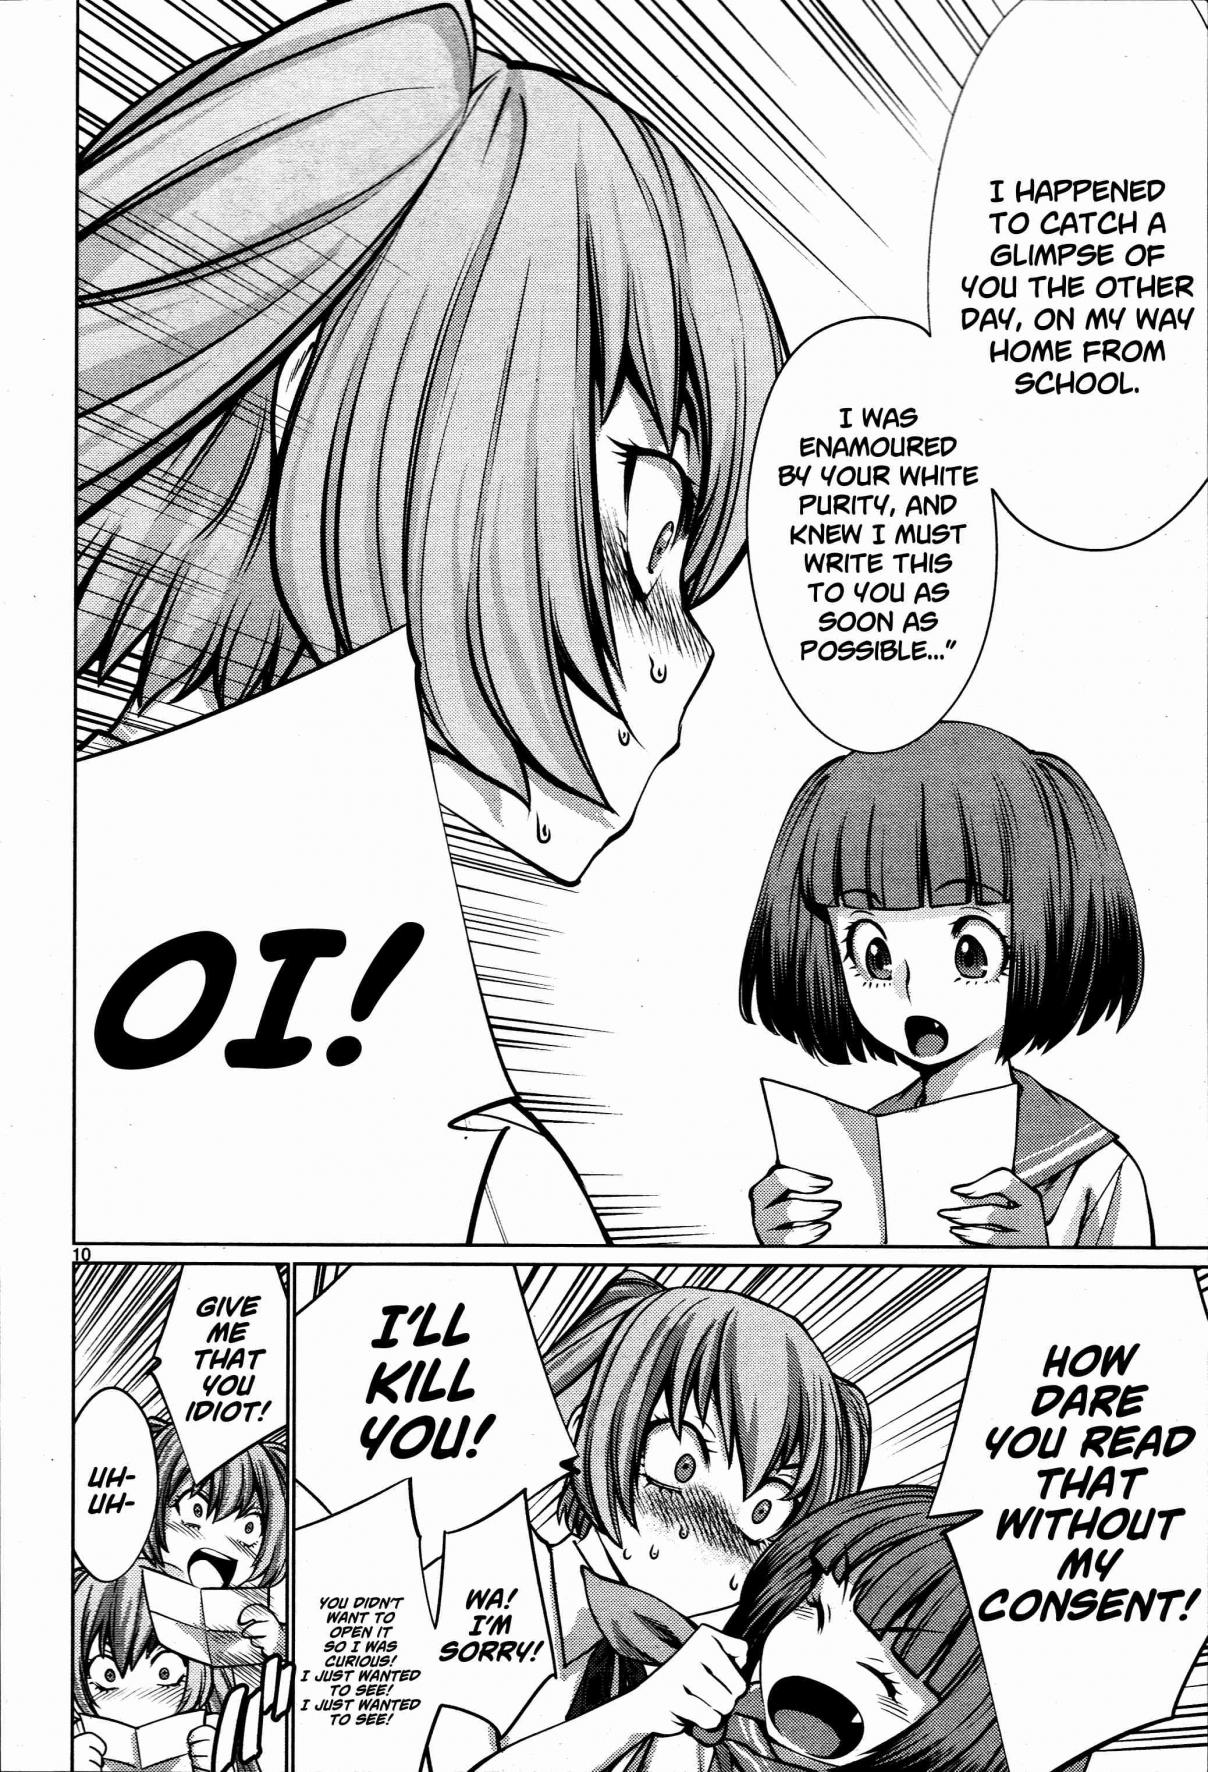 Killing Bites Vol. 15 Ch. 70 "If You Like 'em That Much, I'll Give it to You."